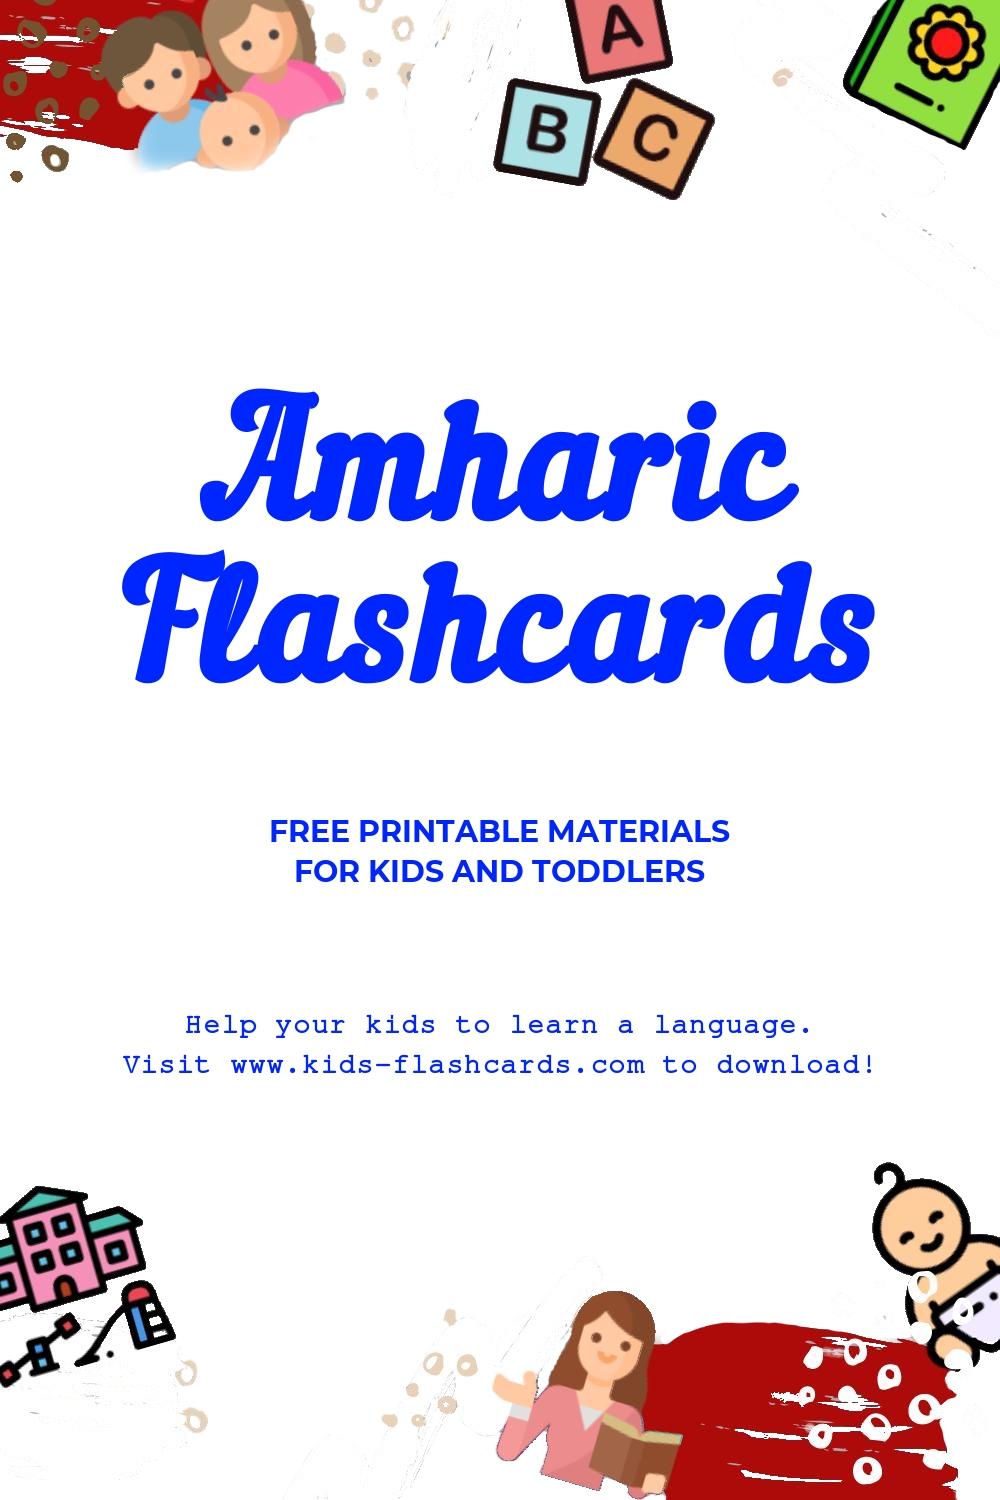 Worksheets to learn Amharic language